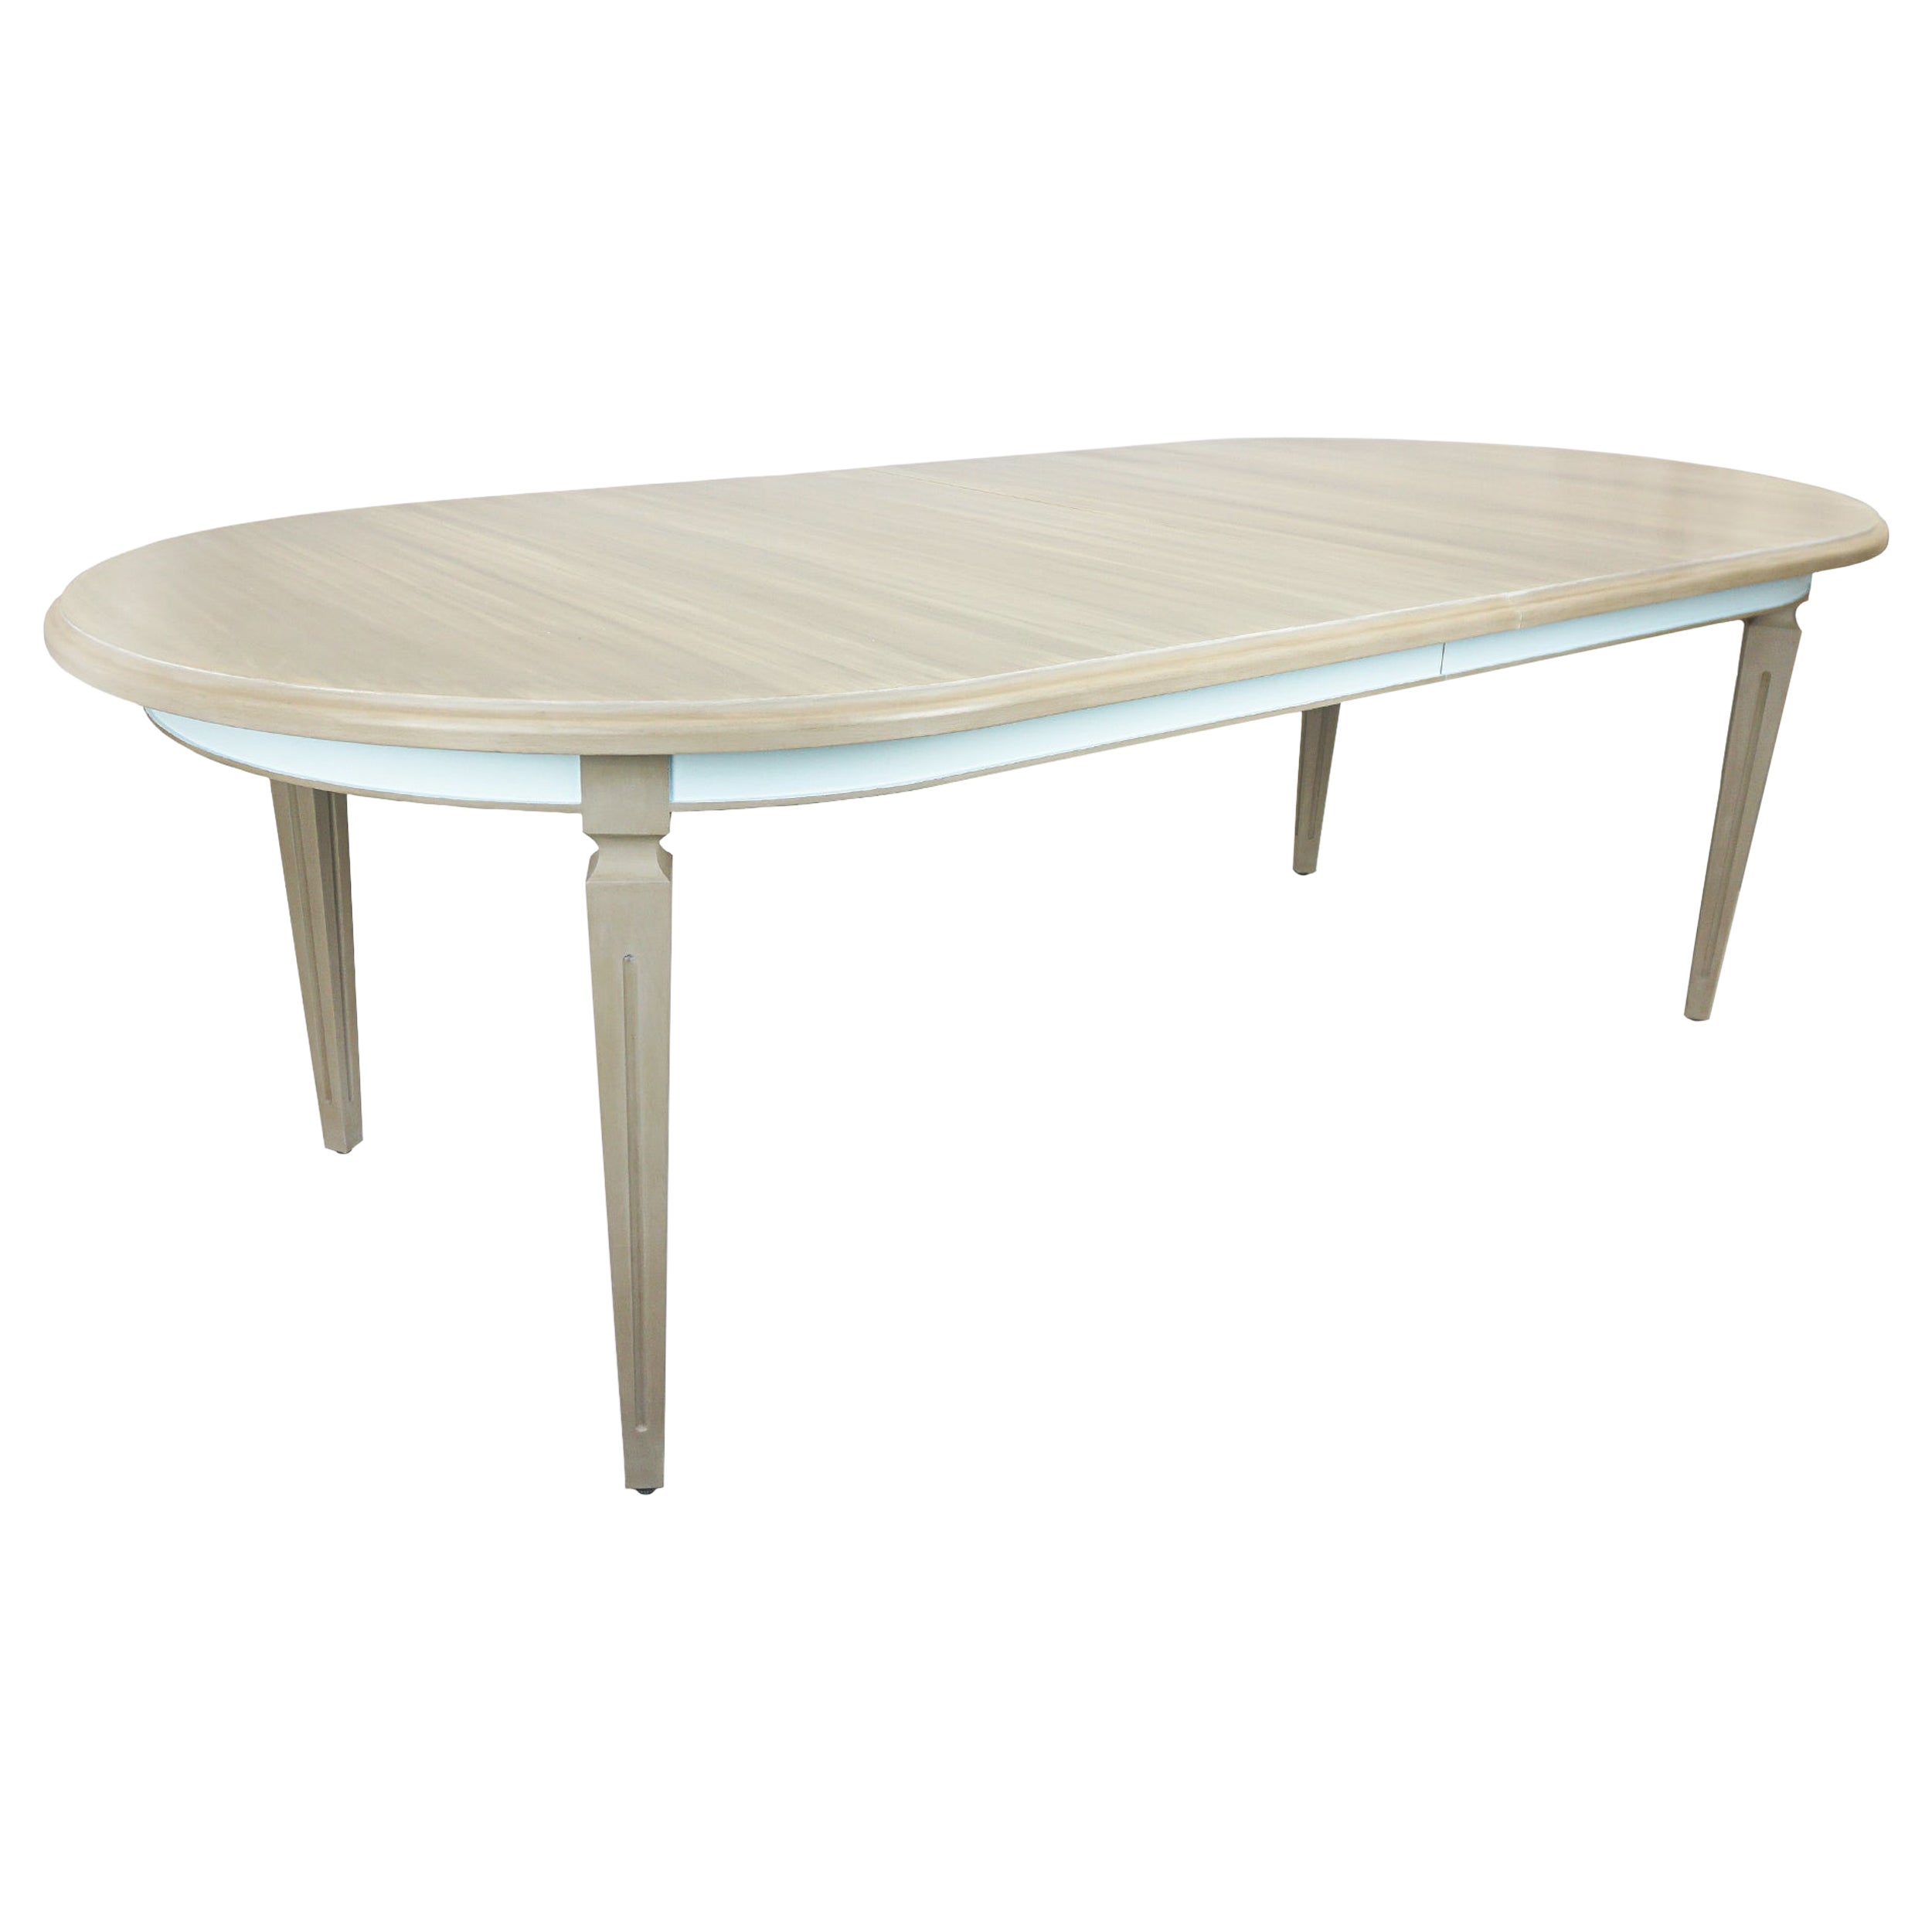 French Style Dining Table with 2 Leaf Extensions